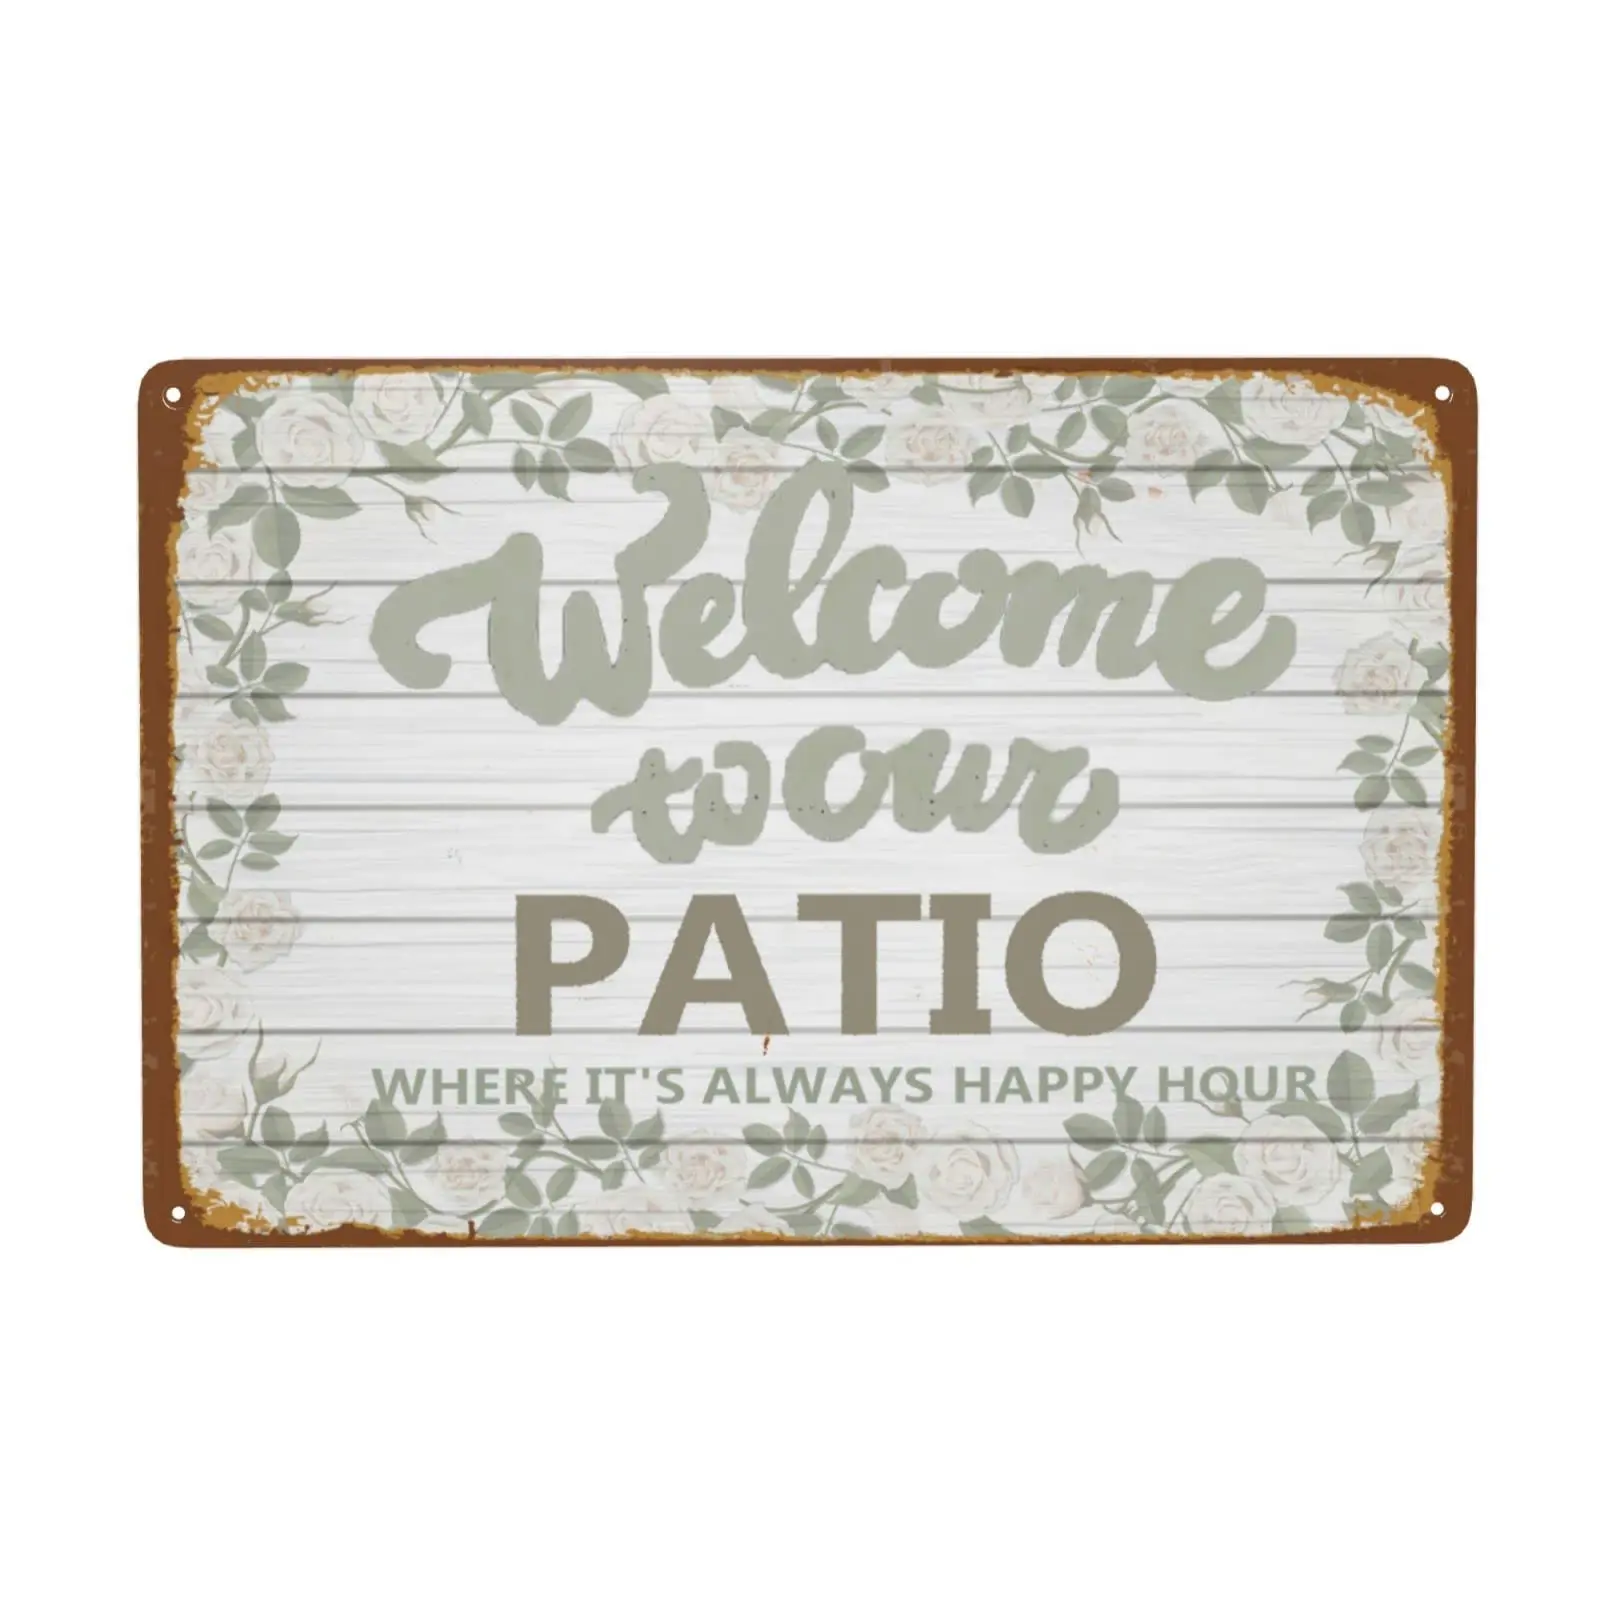 

Welcome To Our Patio Funny Home Decor Tin Sign Retro Metal Bar Pub Poster 8×12 Inch